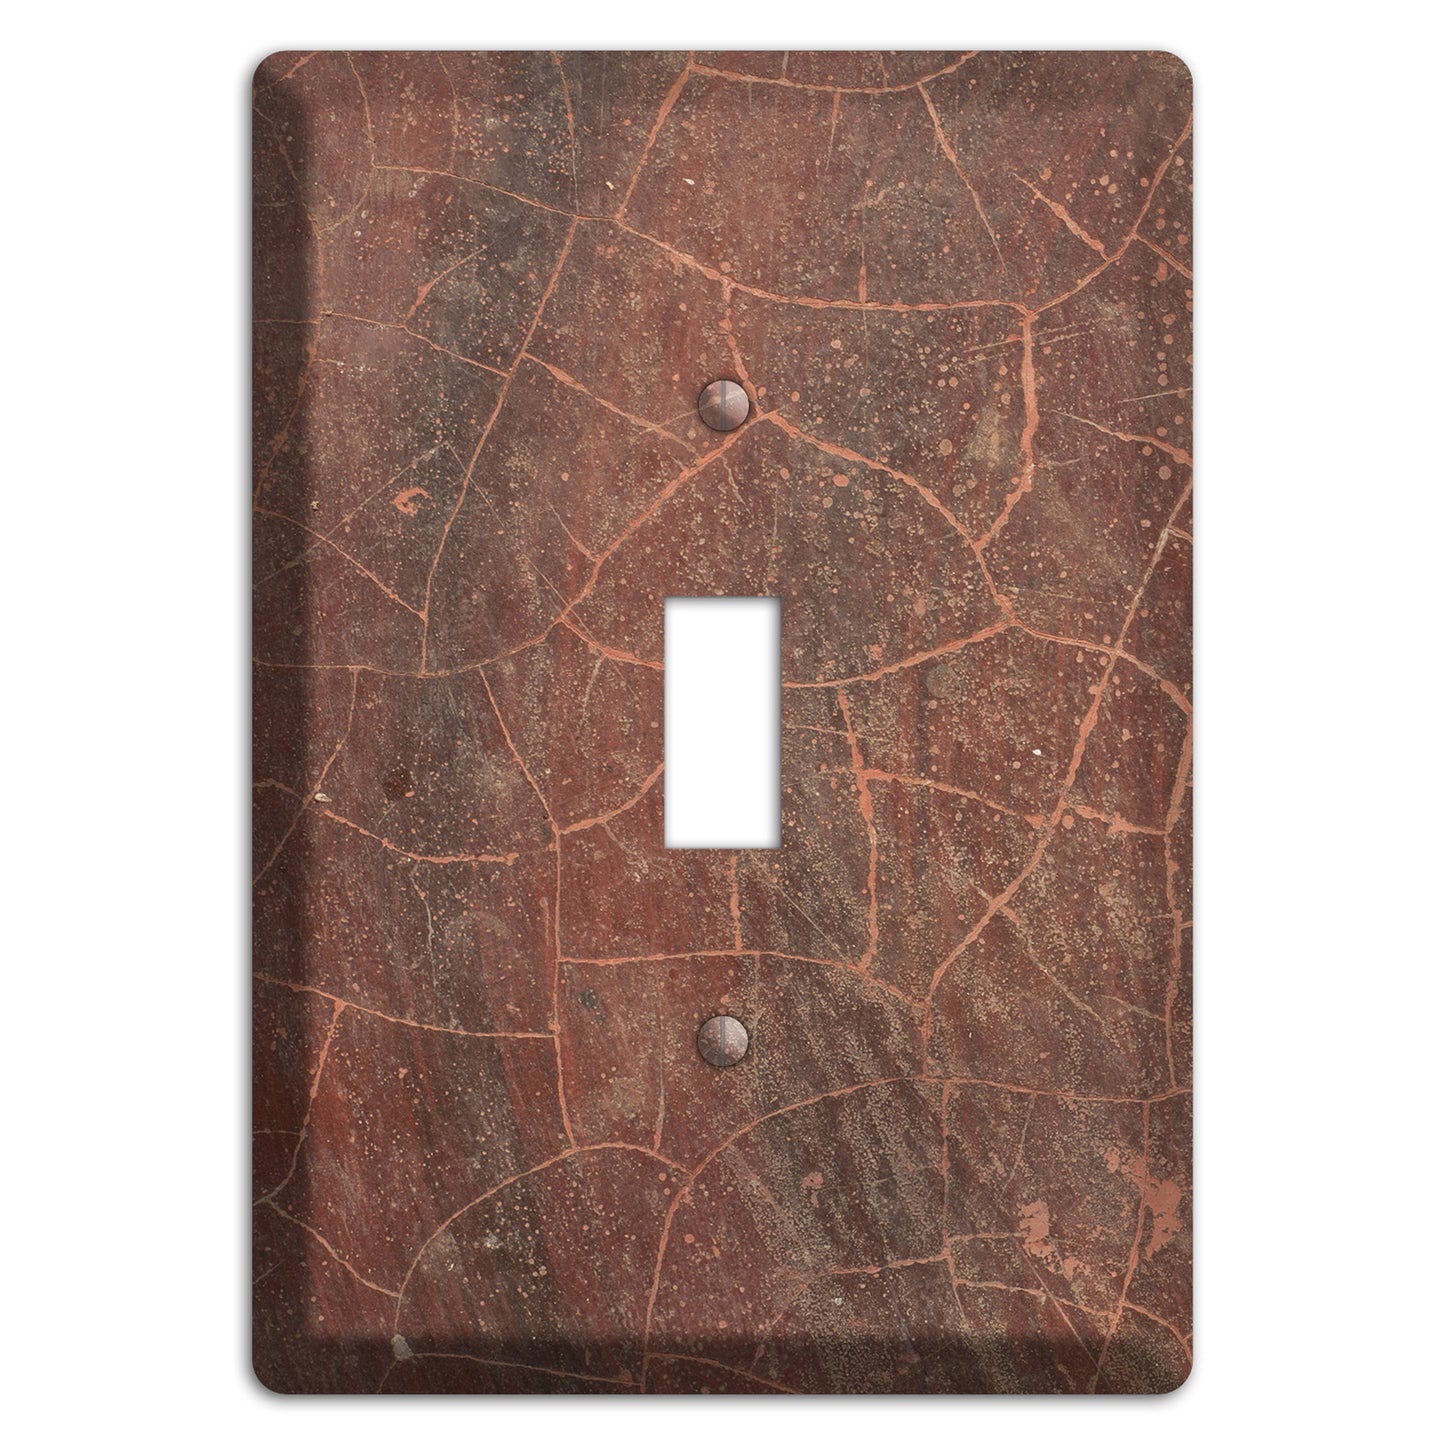 Maroon Cracked Concrete Cover Plates